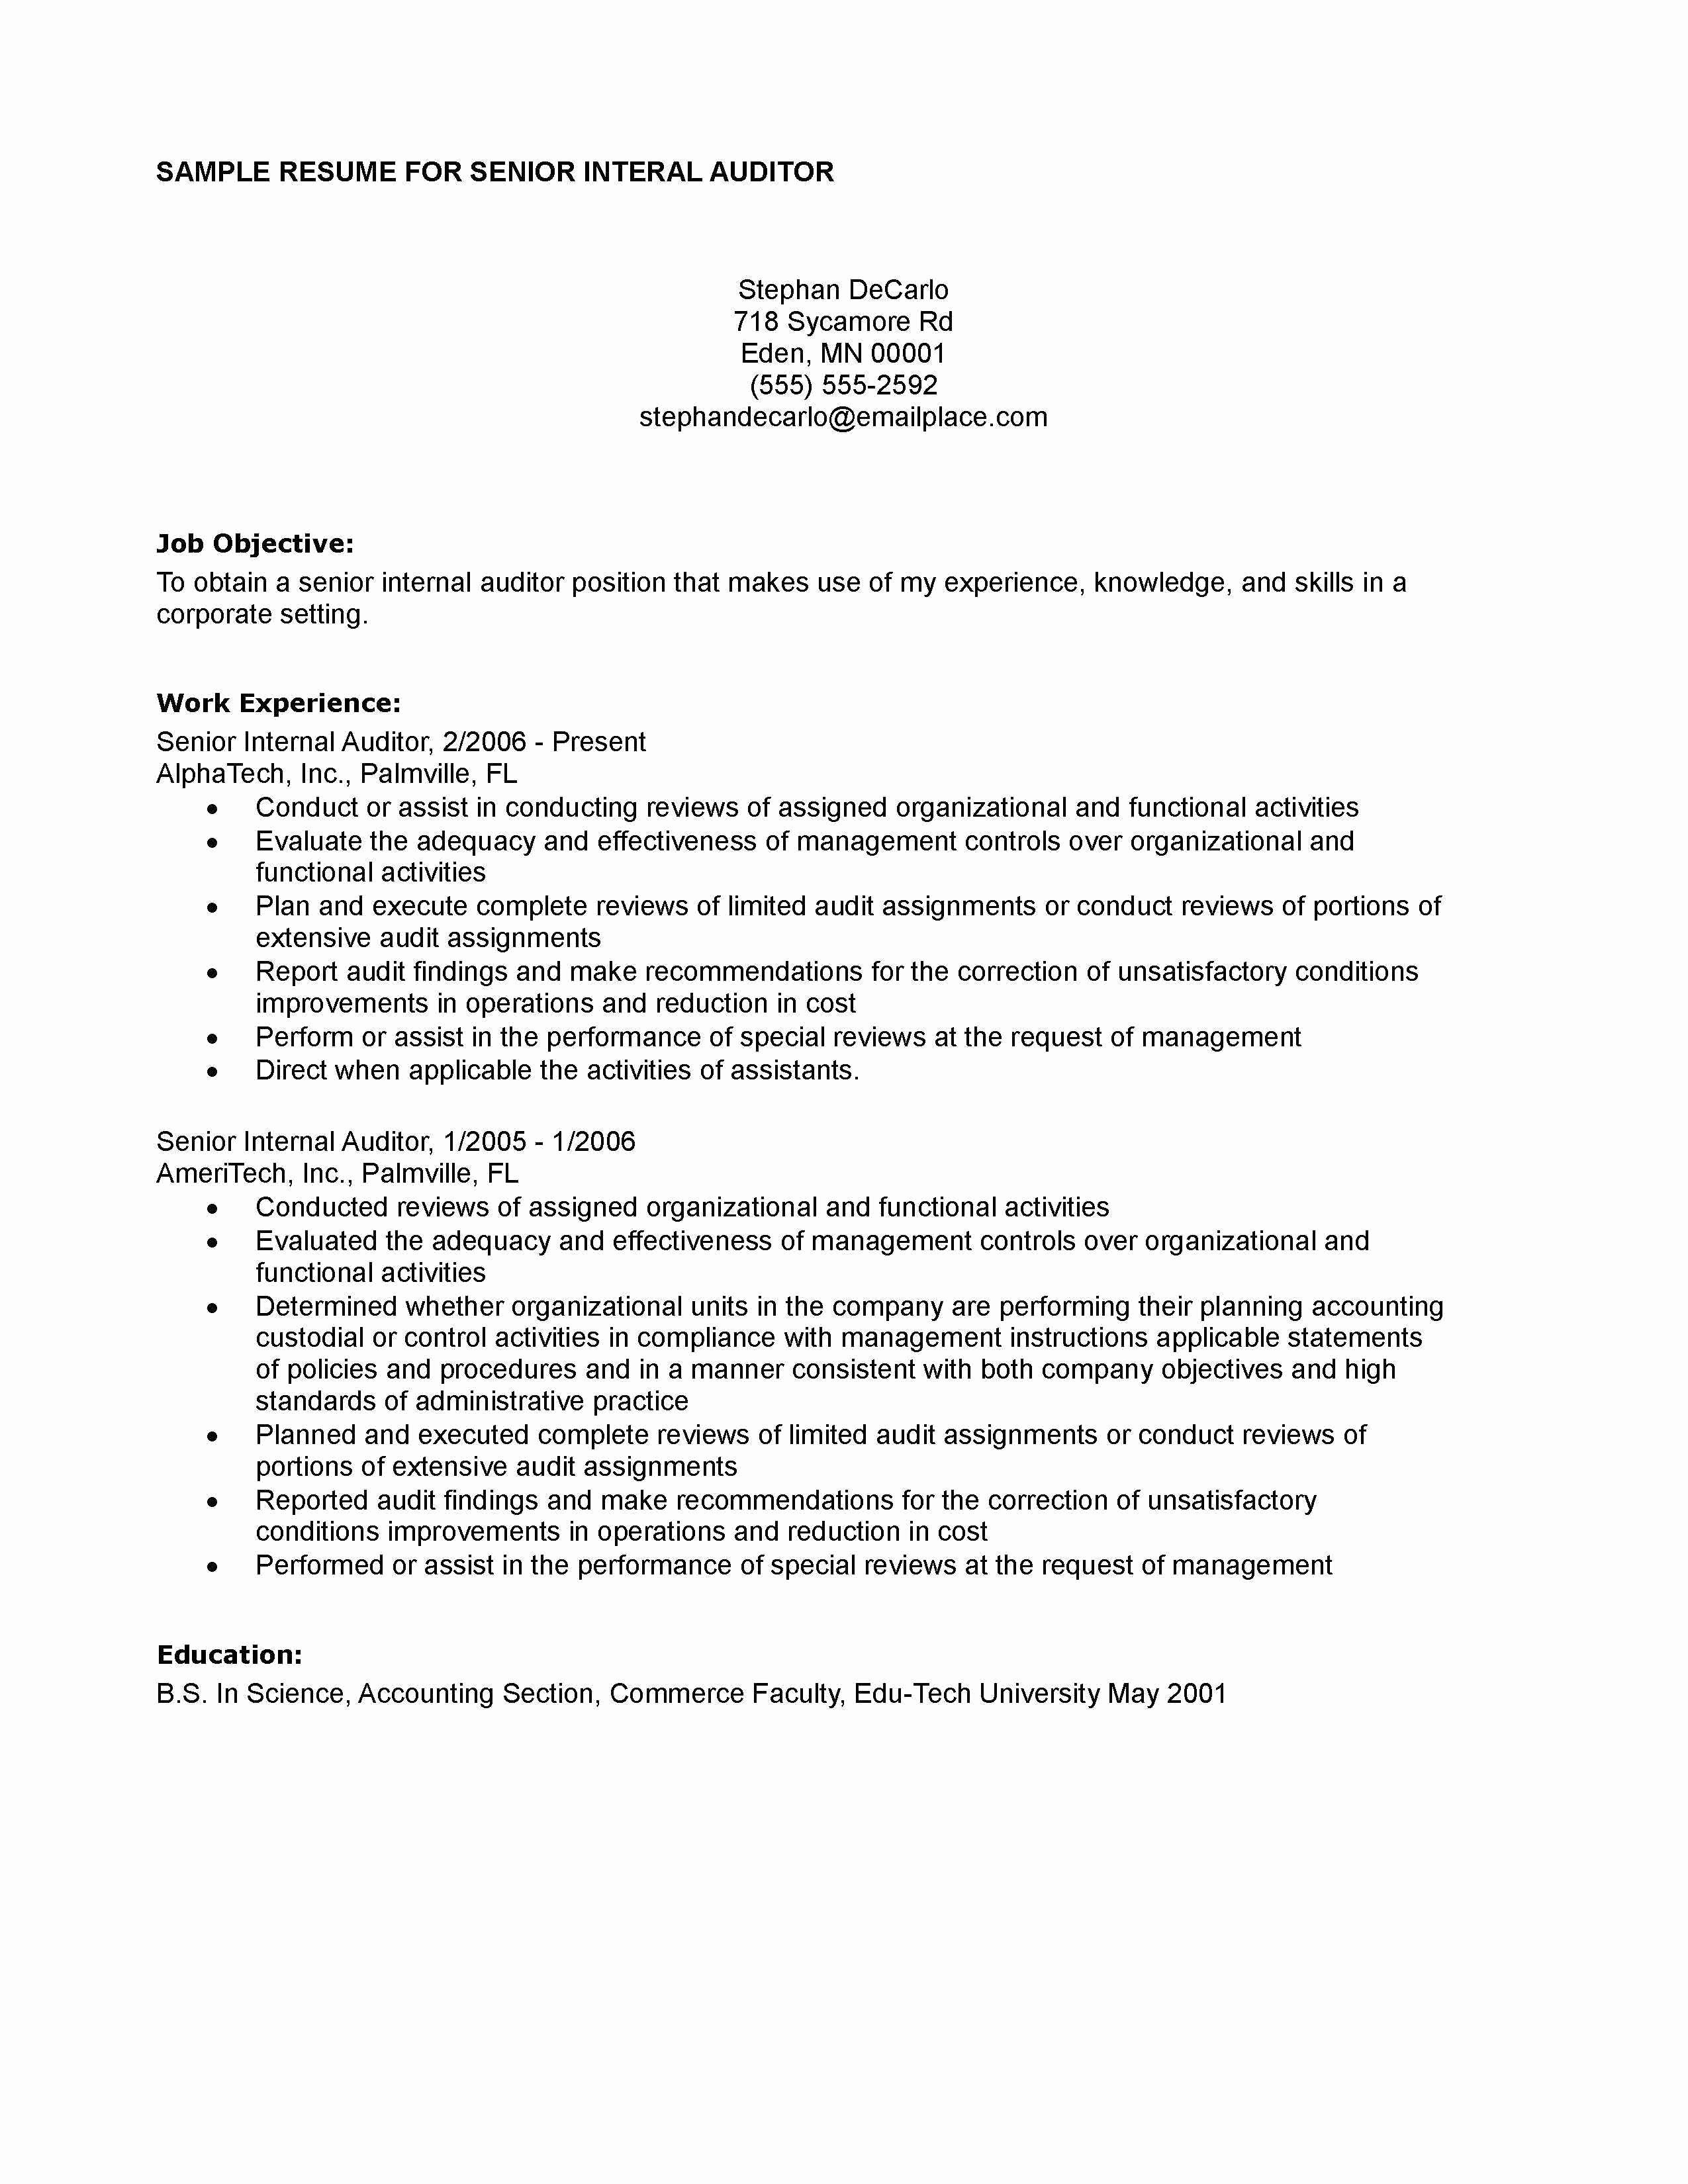 Cover Letter format Uf Awesome Audit Analyst Cover Letter